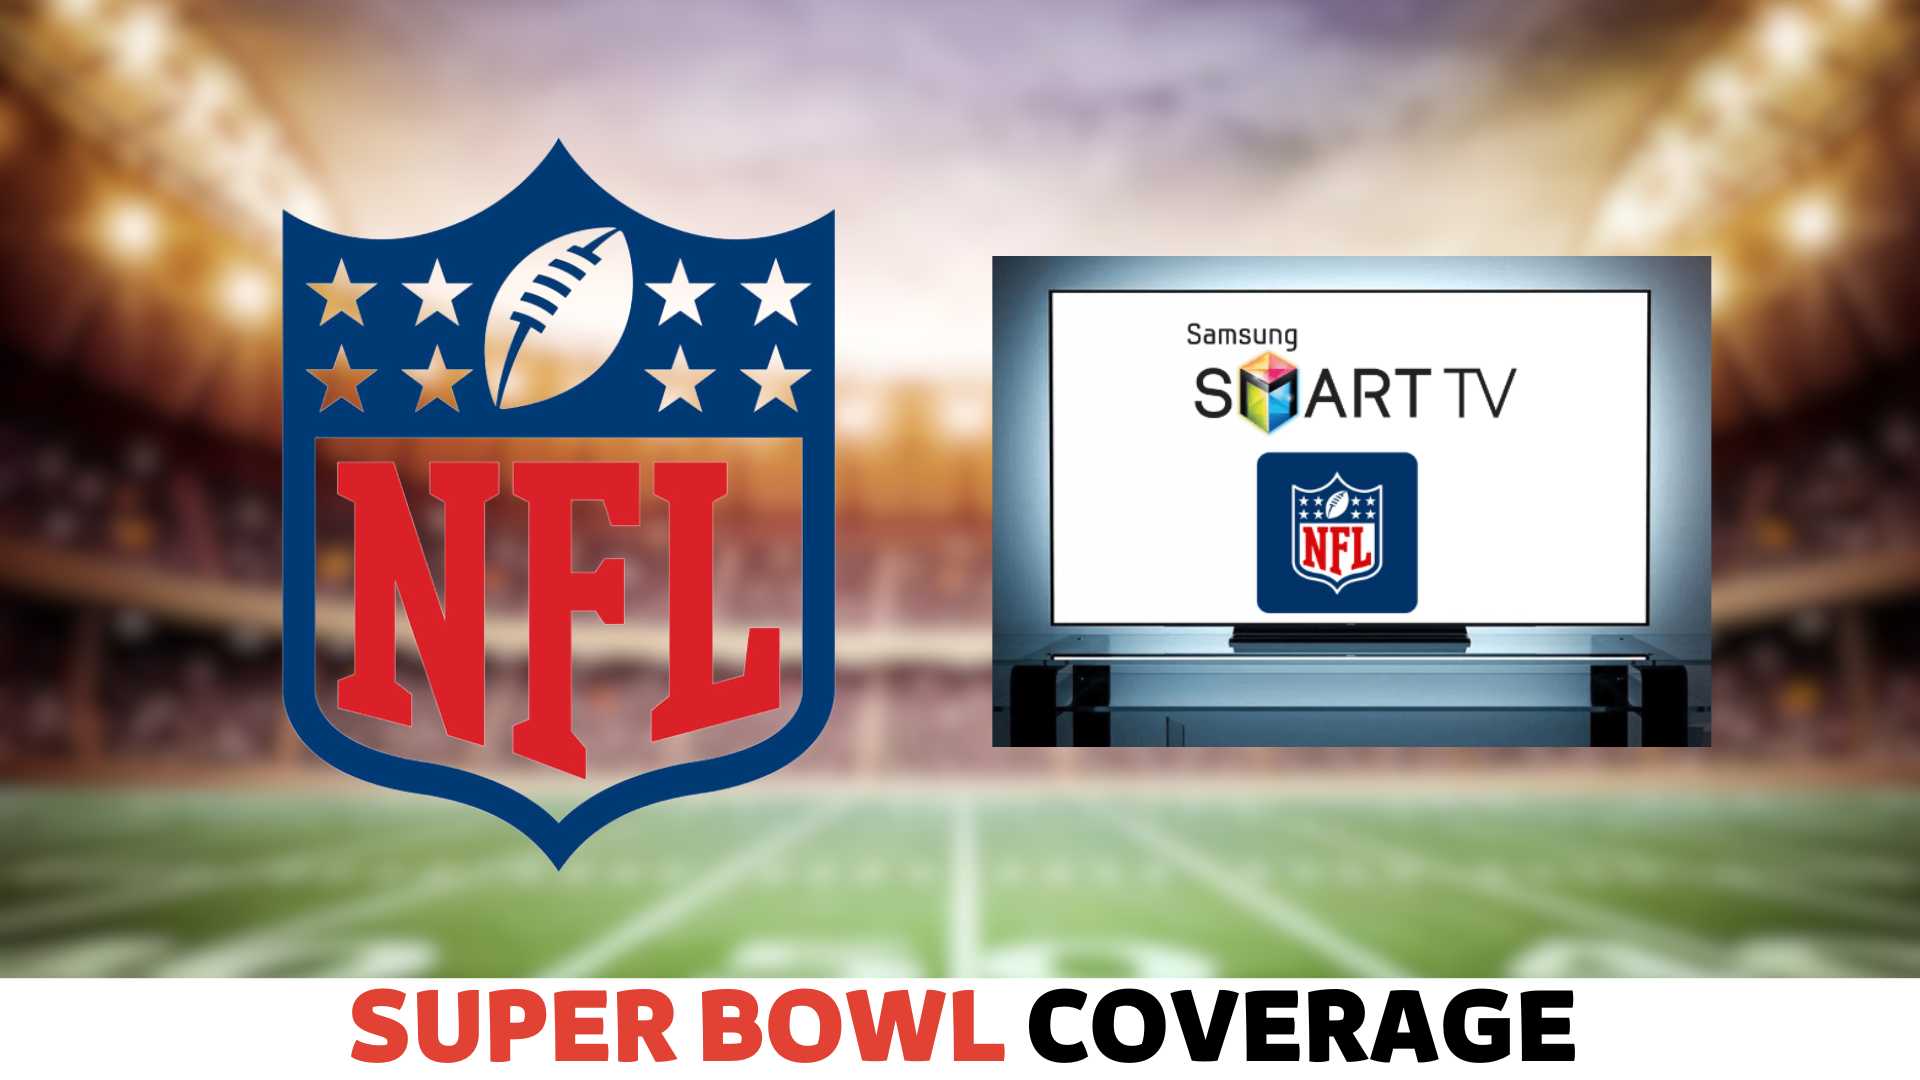 How to Watch NFL Games on Smart TV